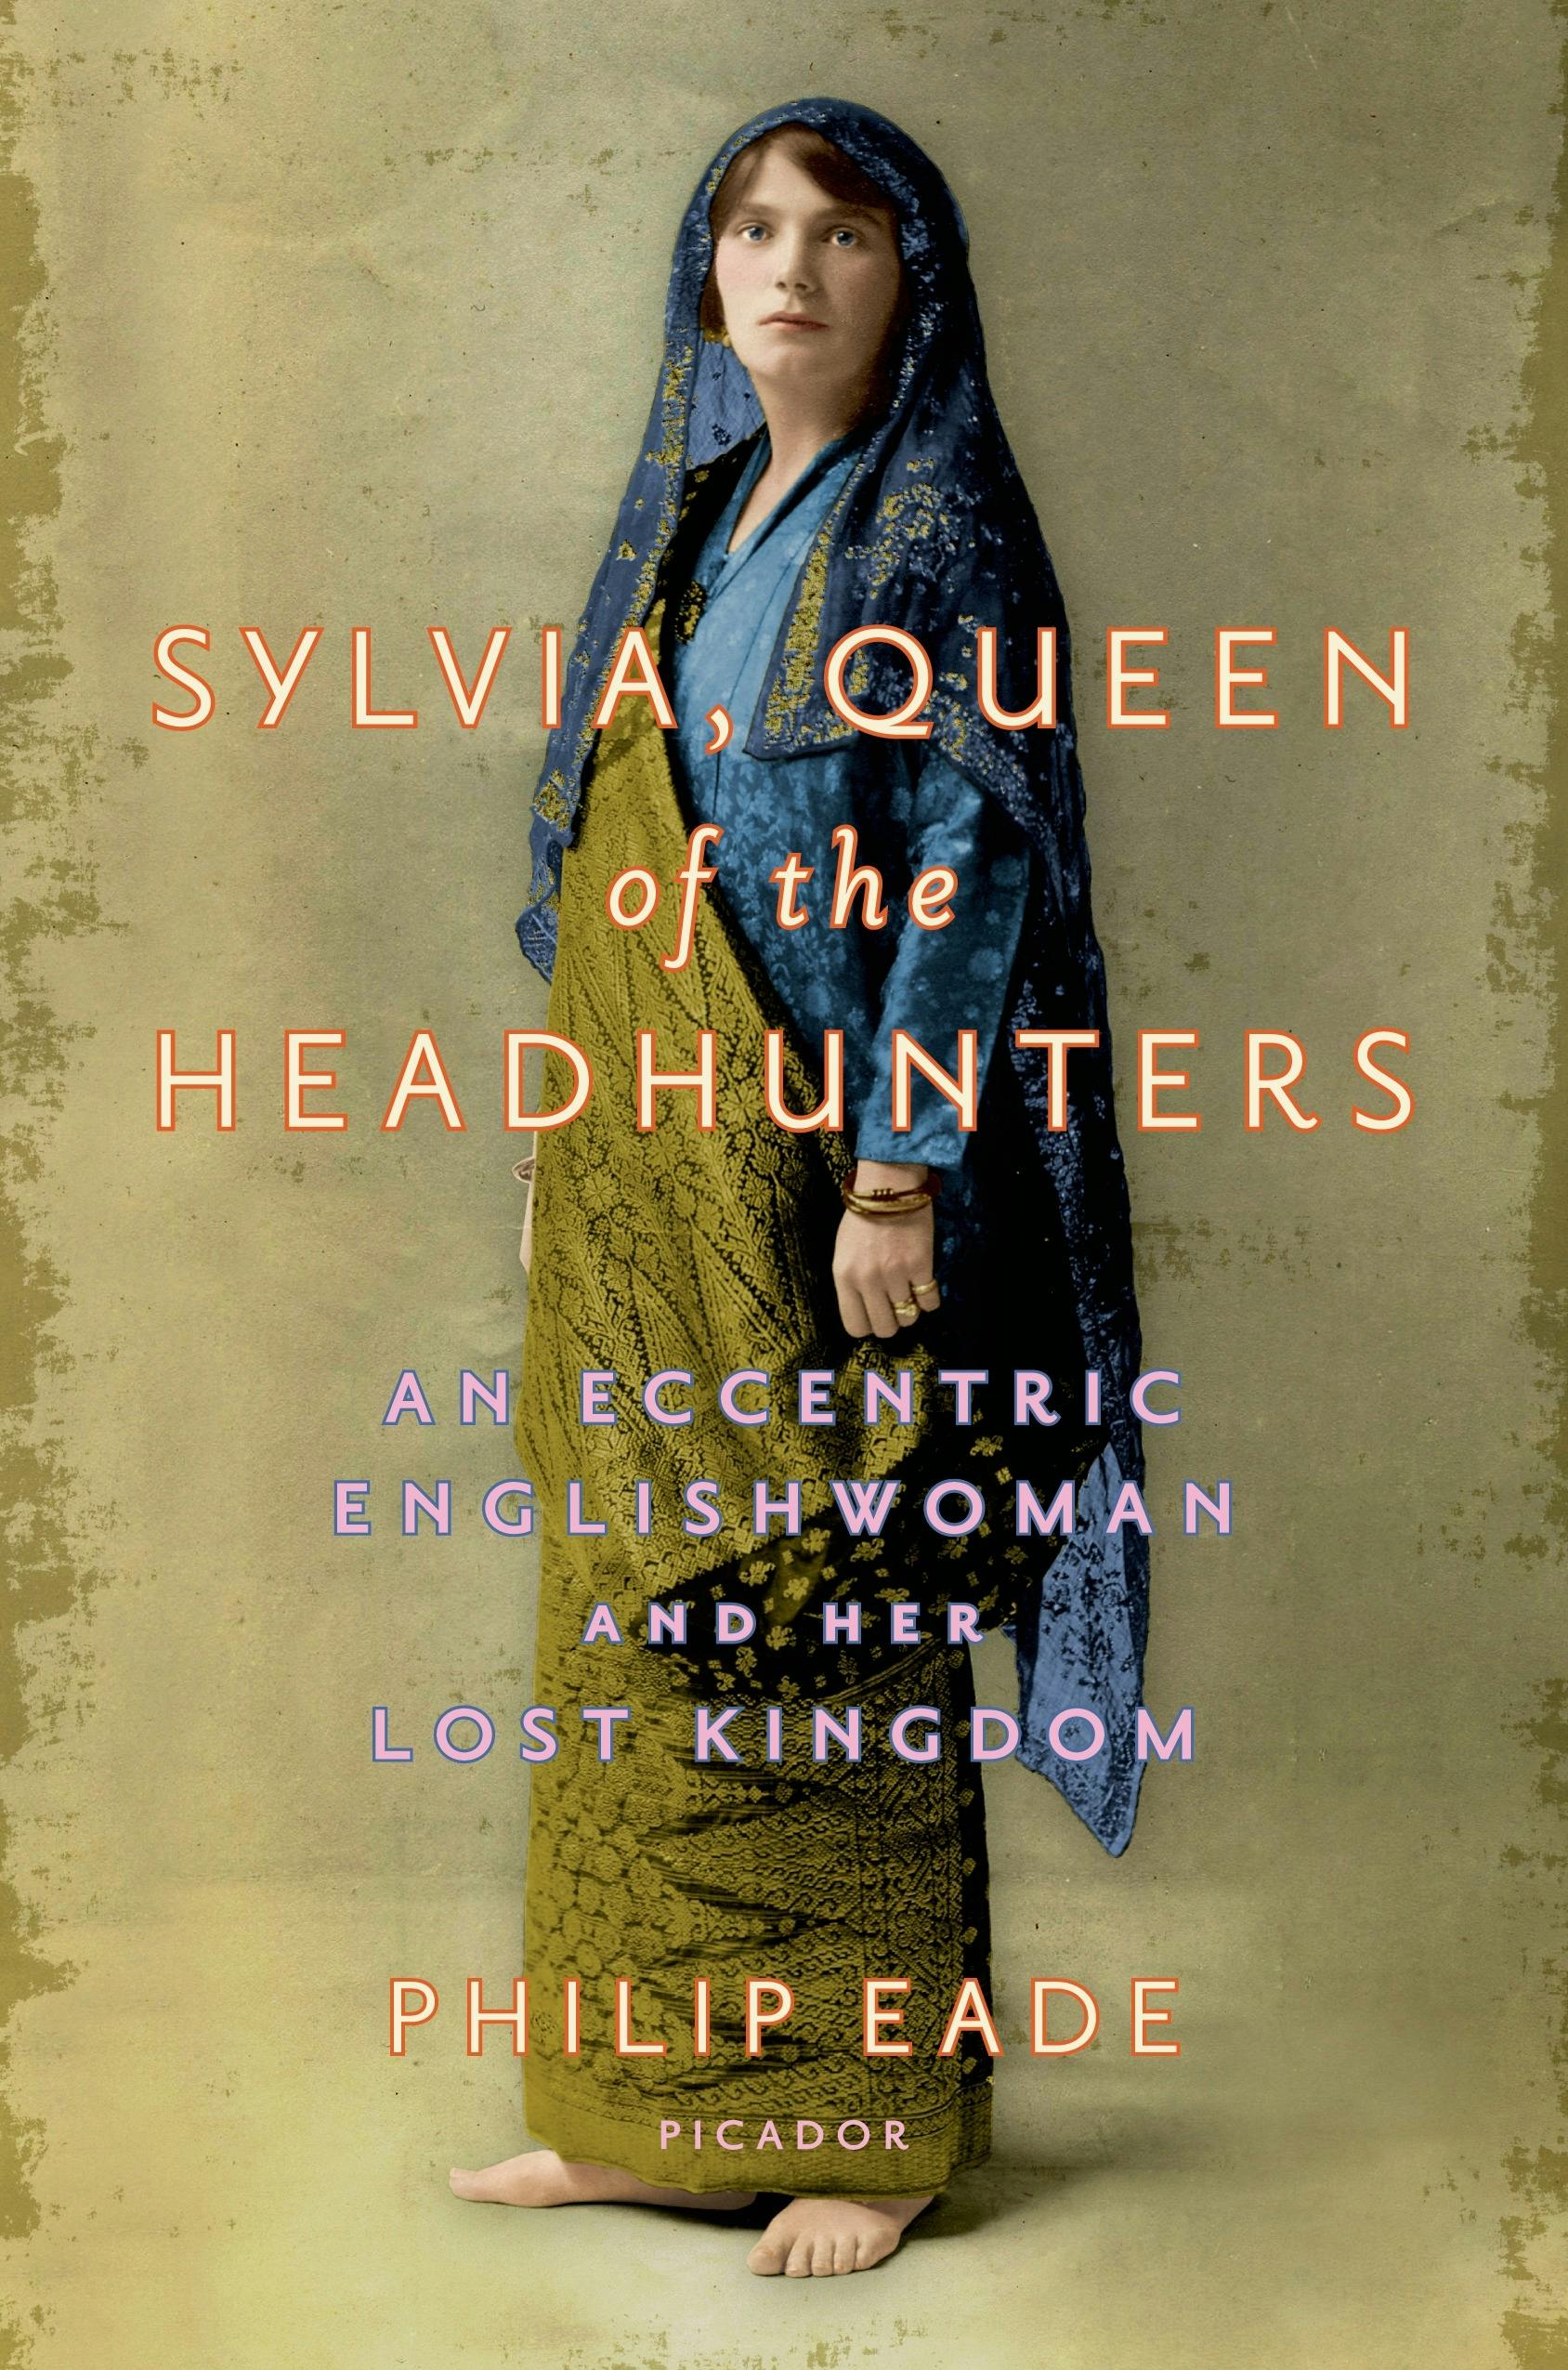 Sylvia, Queen of the Headhunters pic